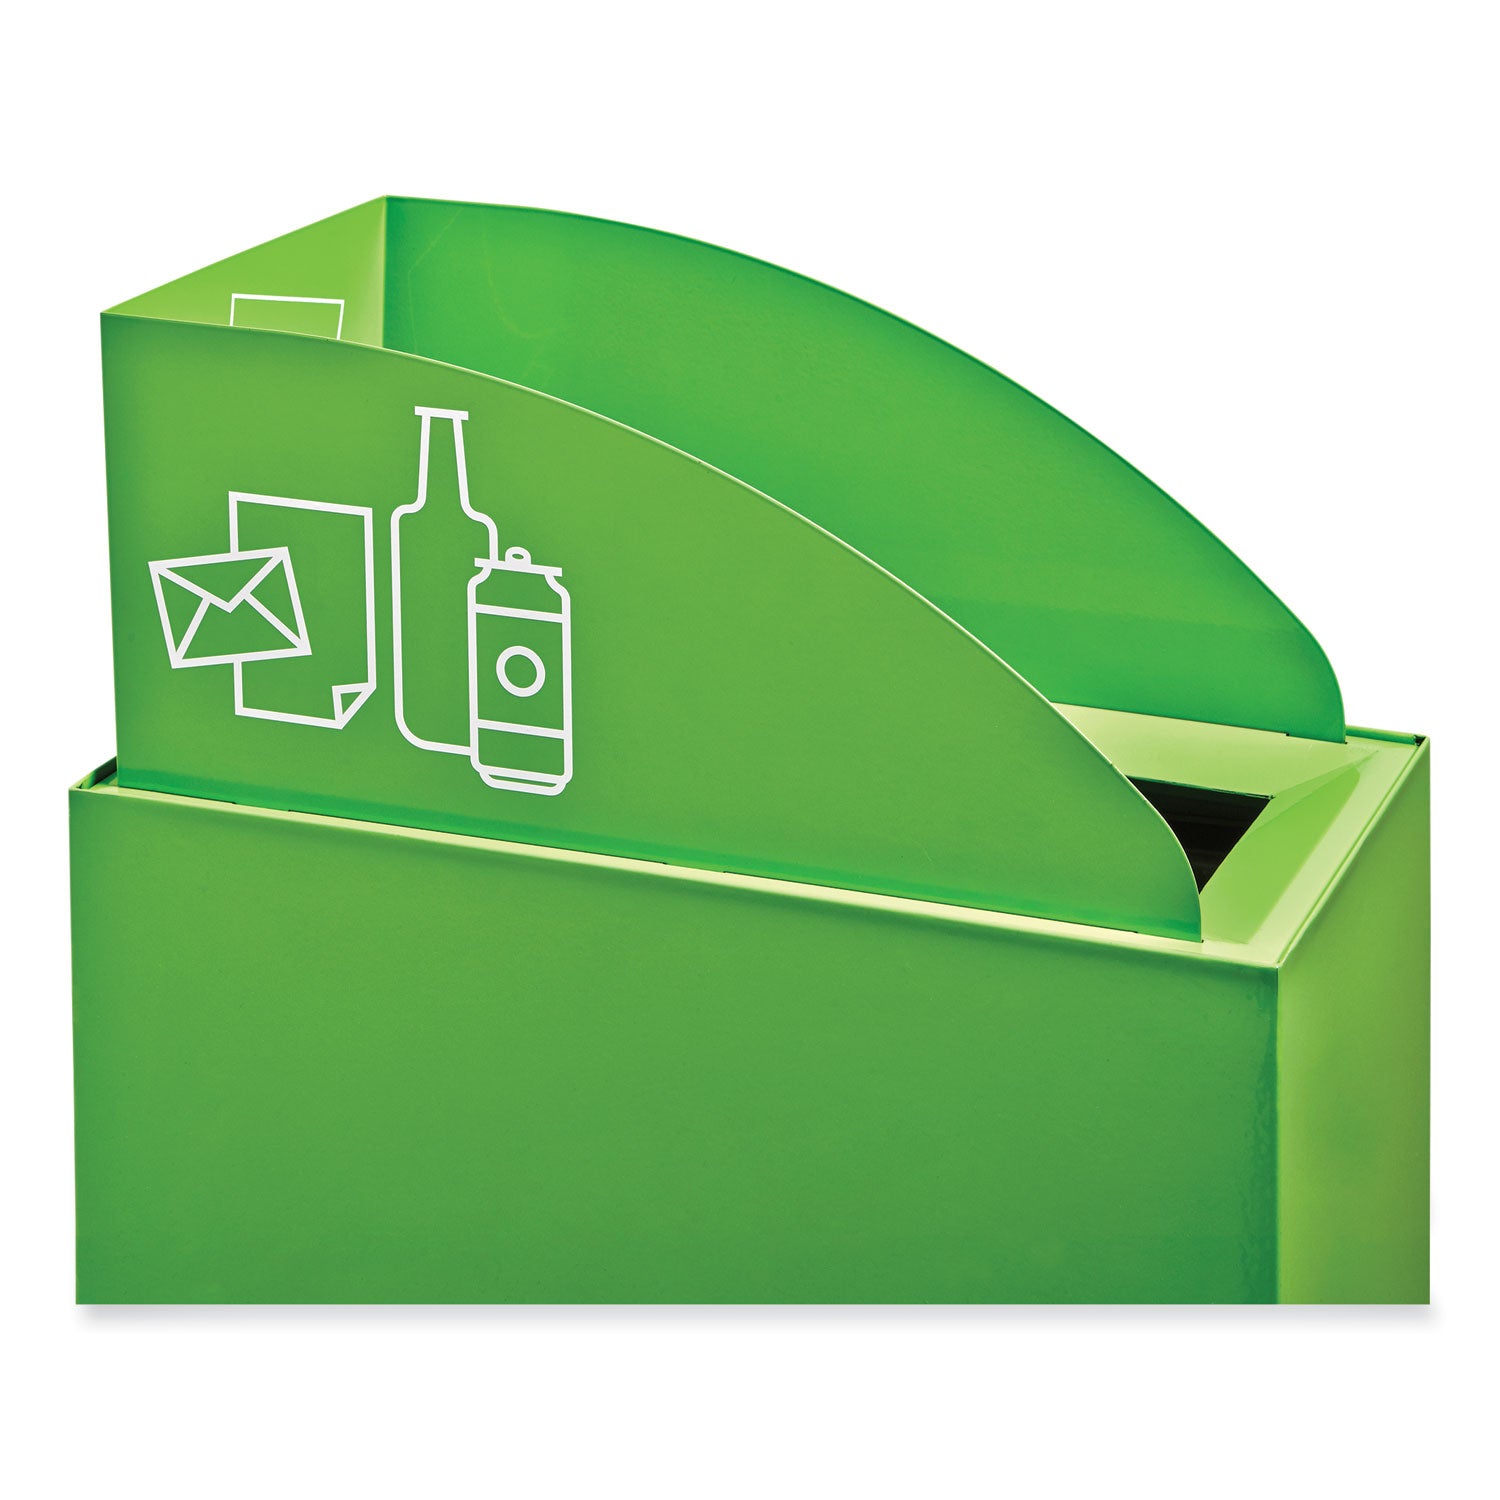 mixx-recycling-center-lid-topper-style-987w-x-1987d-x-062h-green-ships-in-1-3-business-days_saf9449gn - 6